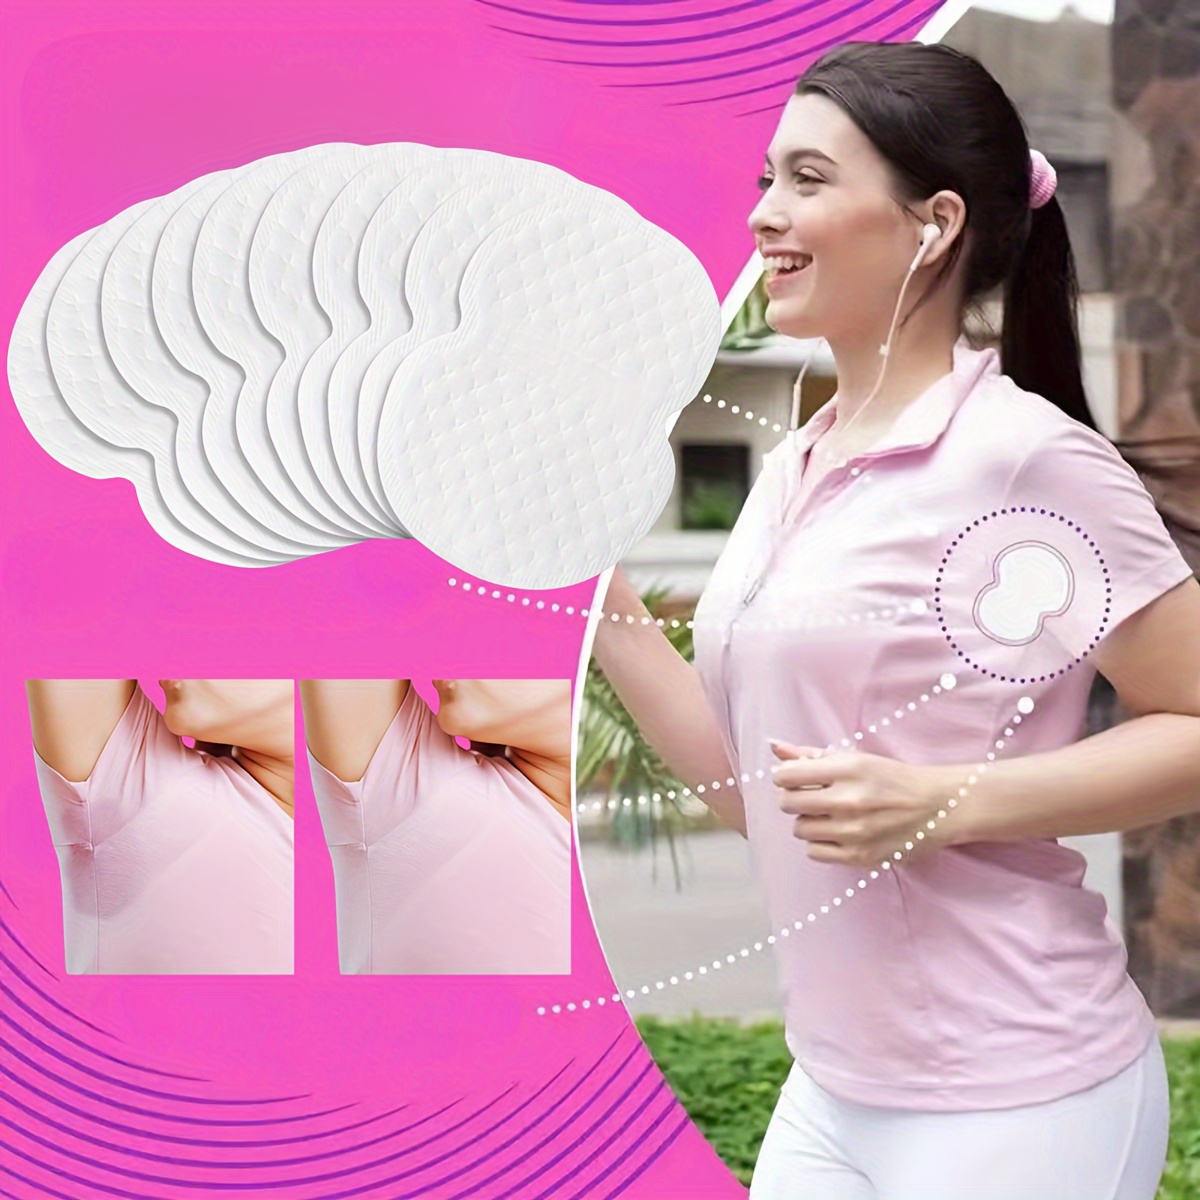 glambelle Self Stick Disposable Underarm Sweat Pads PACK OF 2